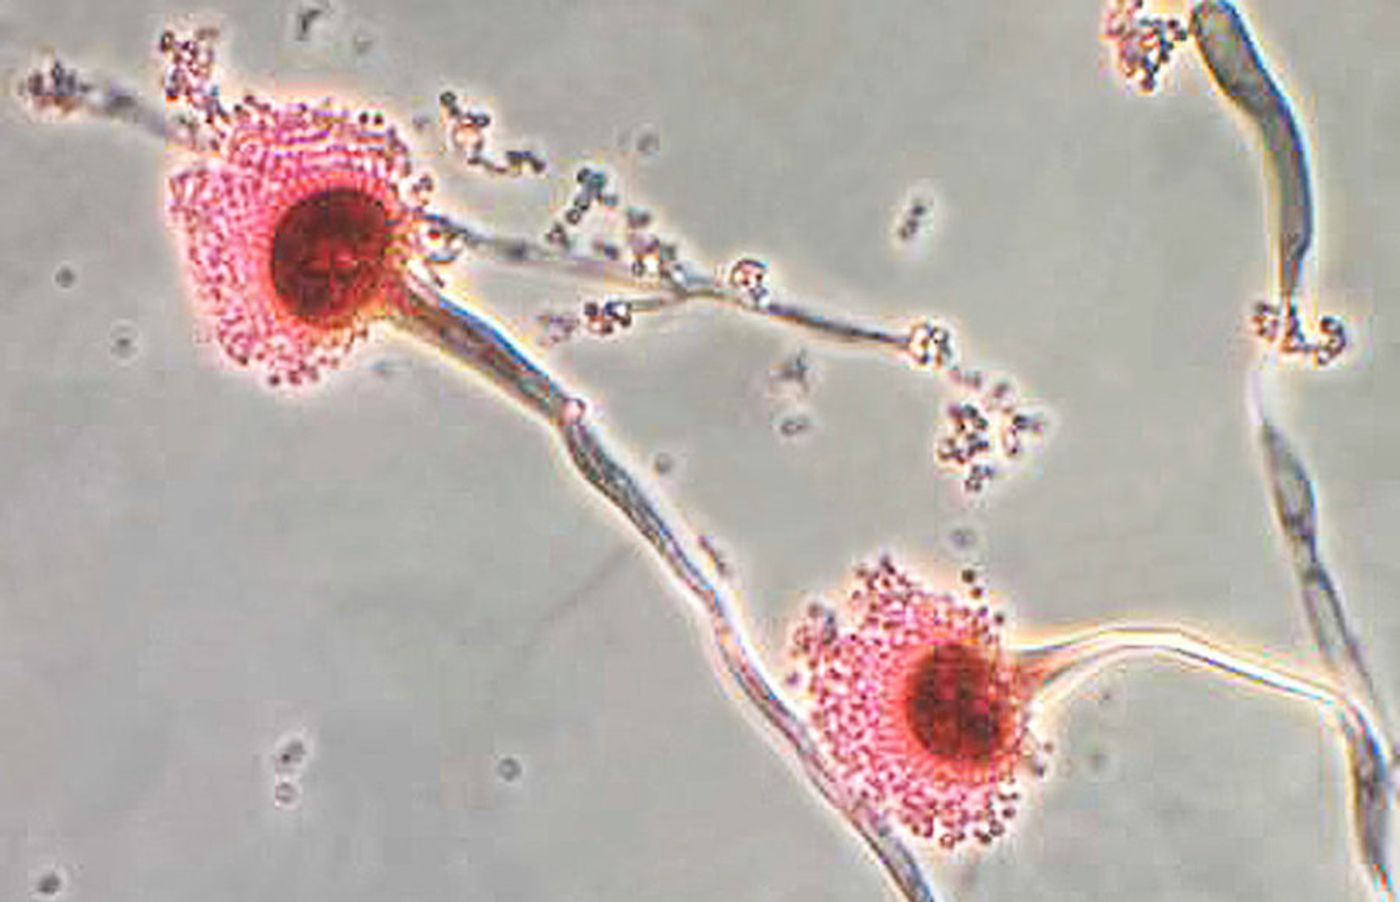 This photomicrograph reveals some of the ultrastructural morphology displayed by the fungal organism Aspergillus fumigatus. / Credit: CDC/Public Health Image Library